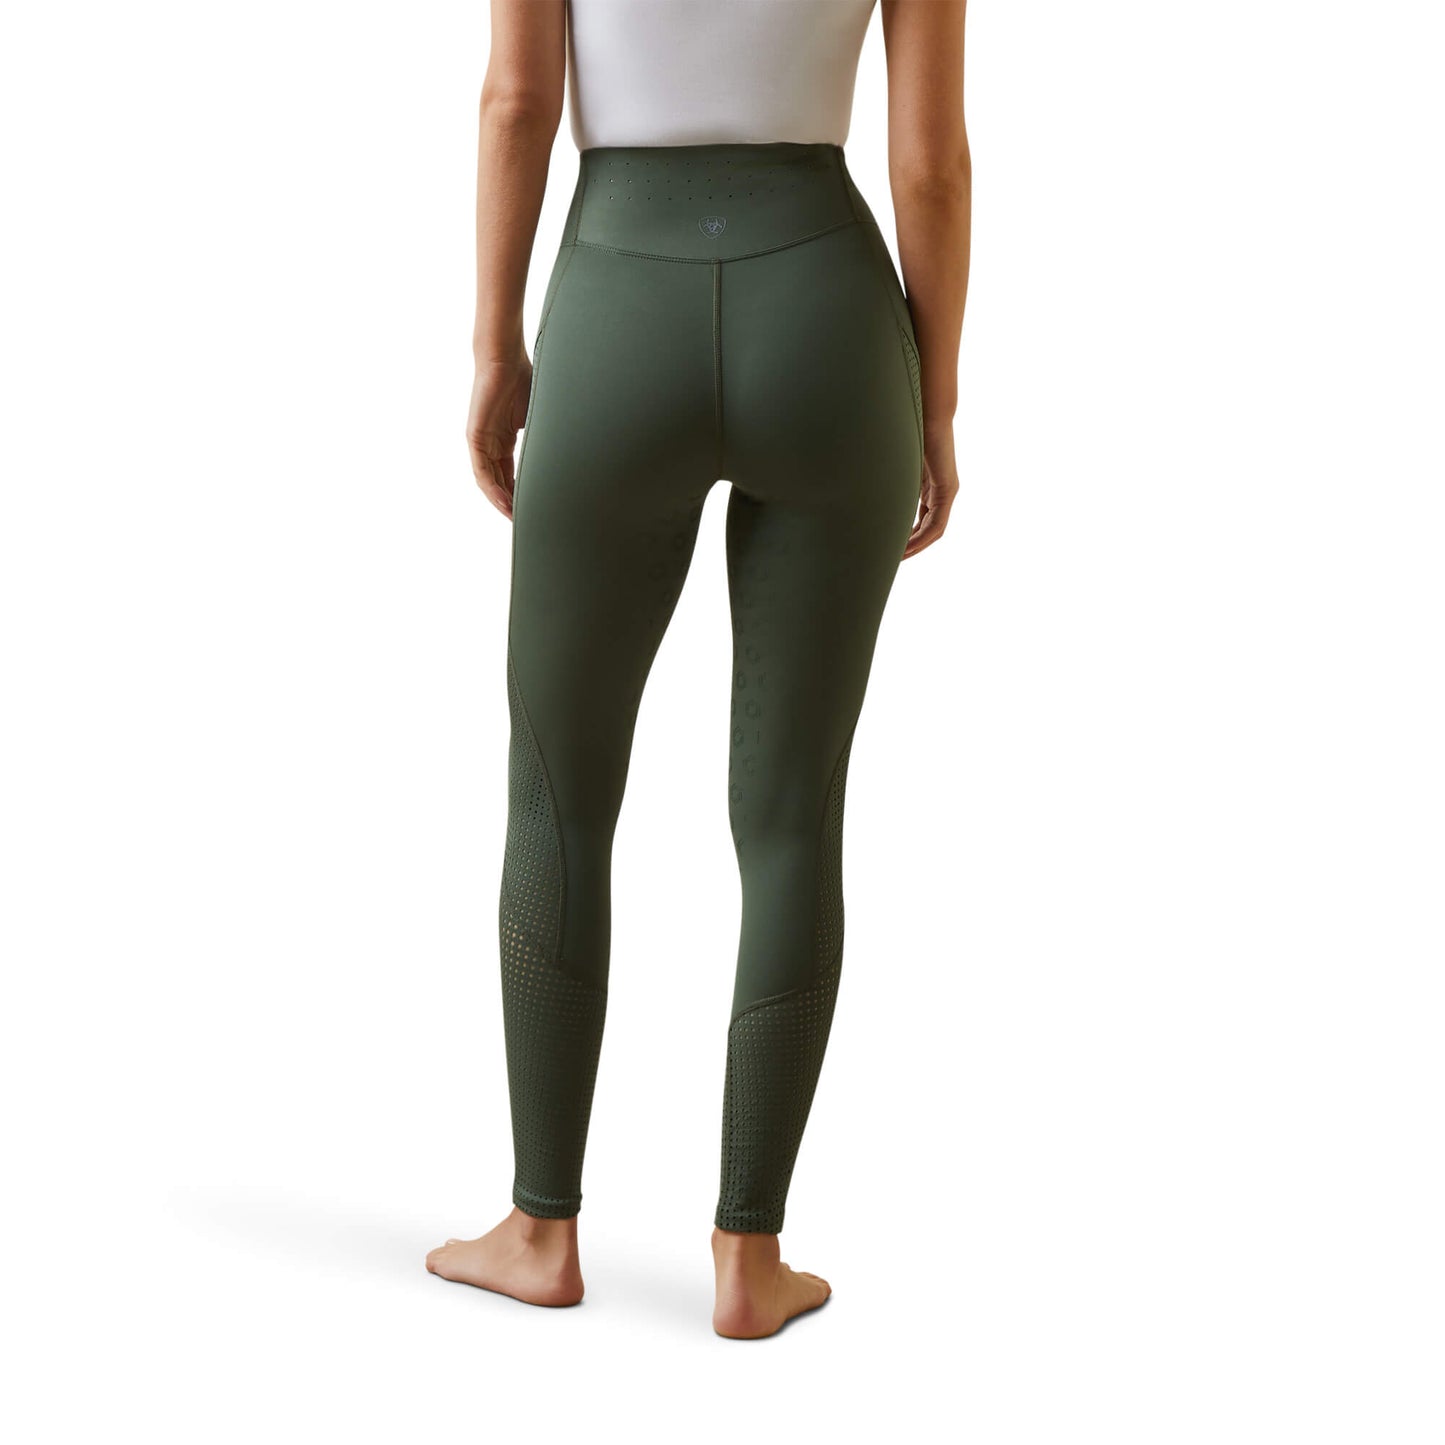 Ariat Beetle Breathe Eos Riding Leggings with Half Silicone Seat